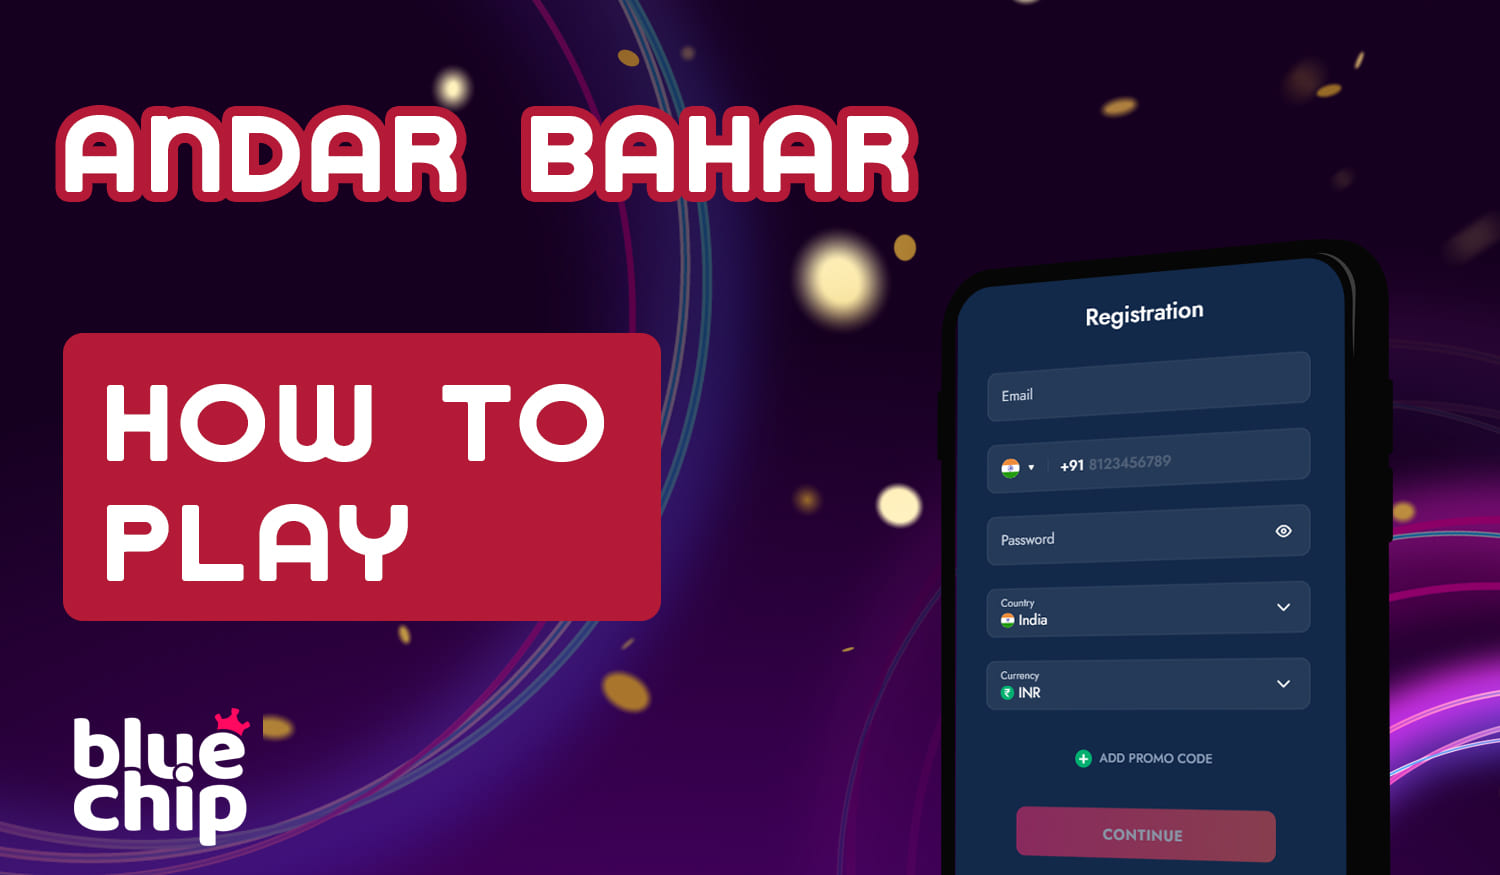 Step-by-step instructions on how to start playing Andar Bahar on BlueChip